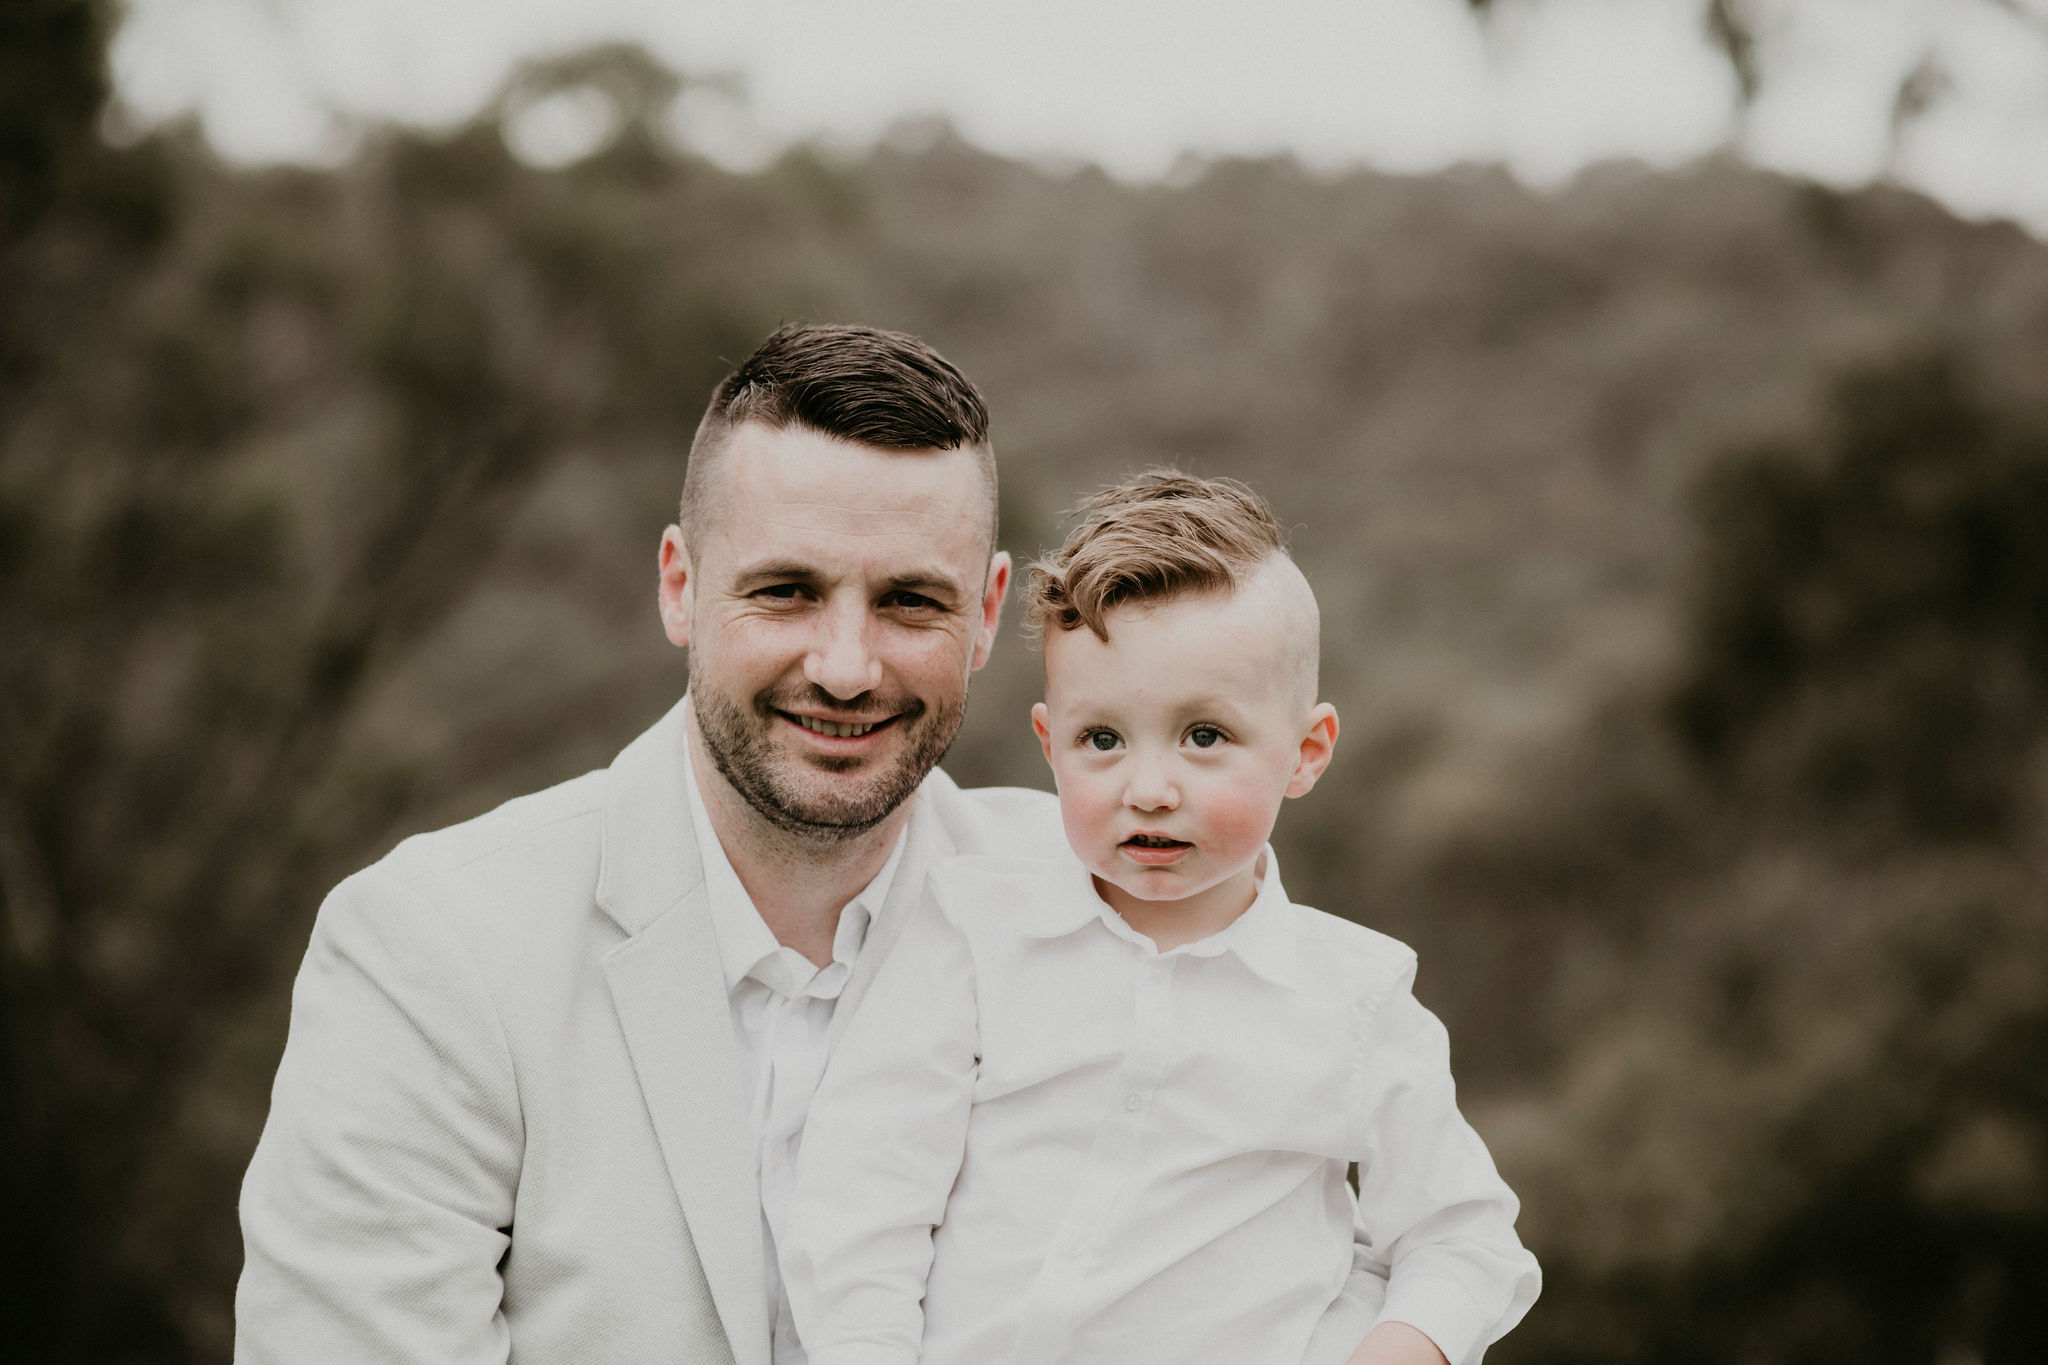 Lets-Elope-Melbourne-Celebrant-Photographer-Elopement-Package-Victoria-Sarah-Matler-Photography-Orchard-with-Kids-Farm-Vigano-weddings-intimate-13